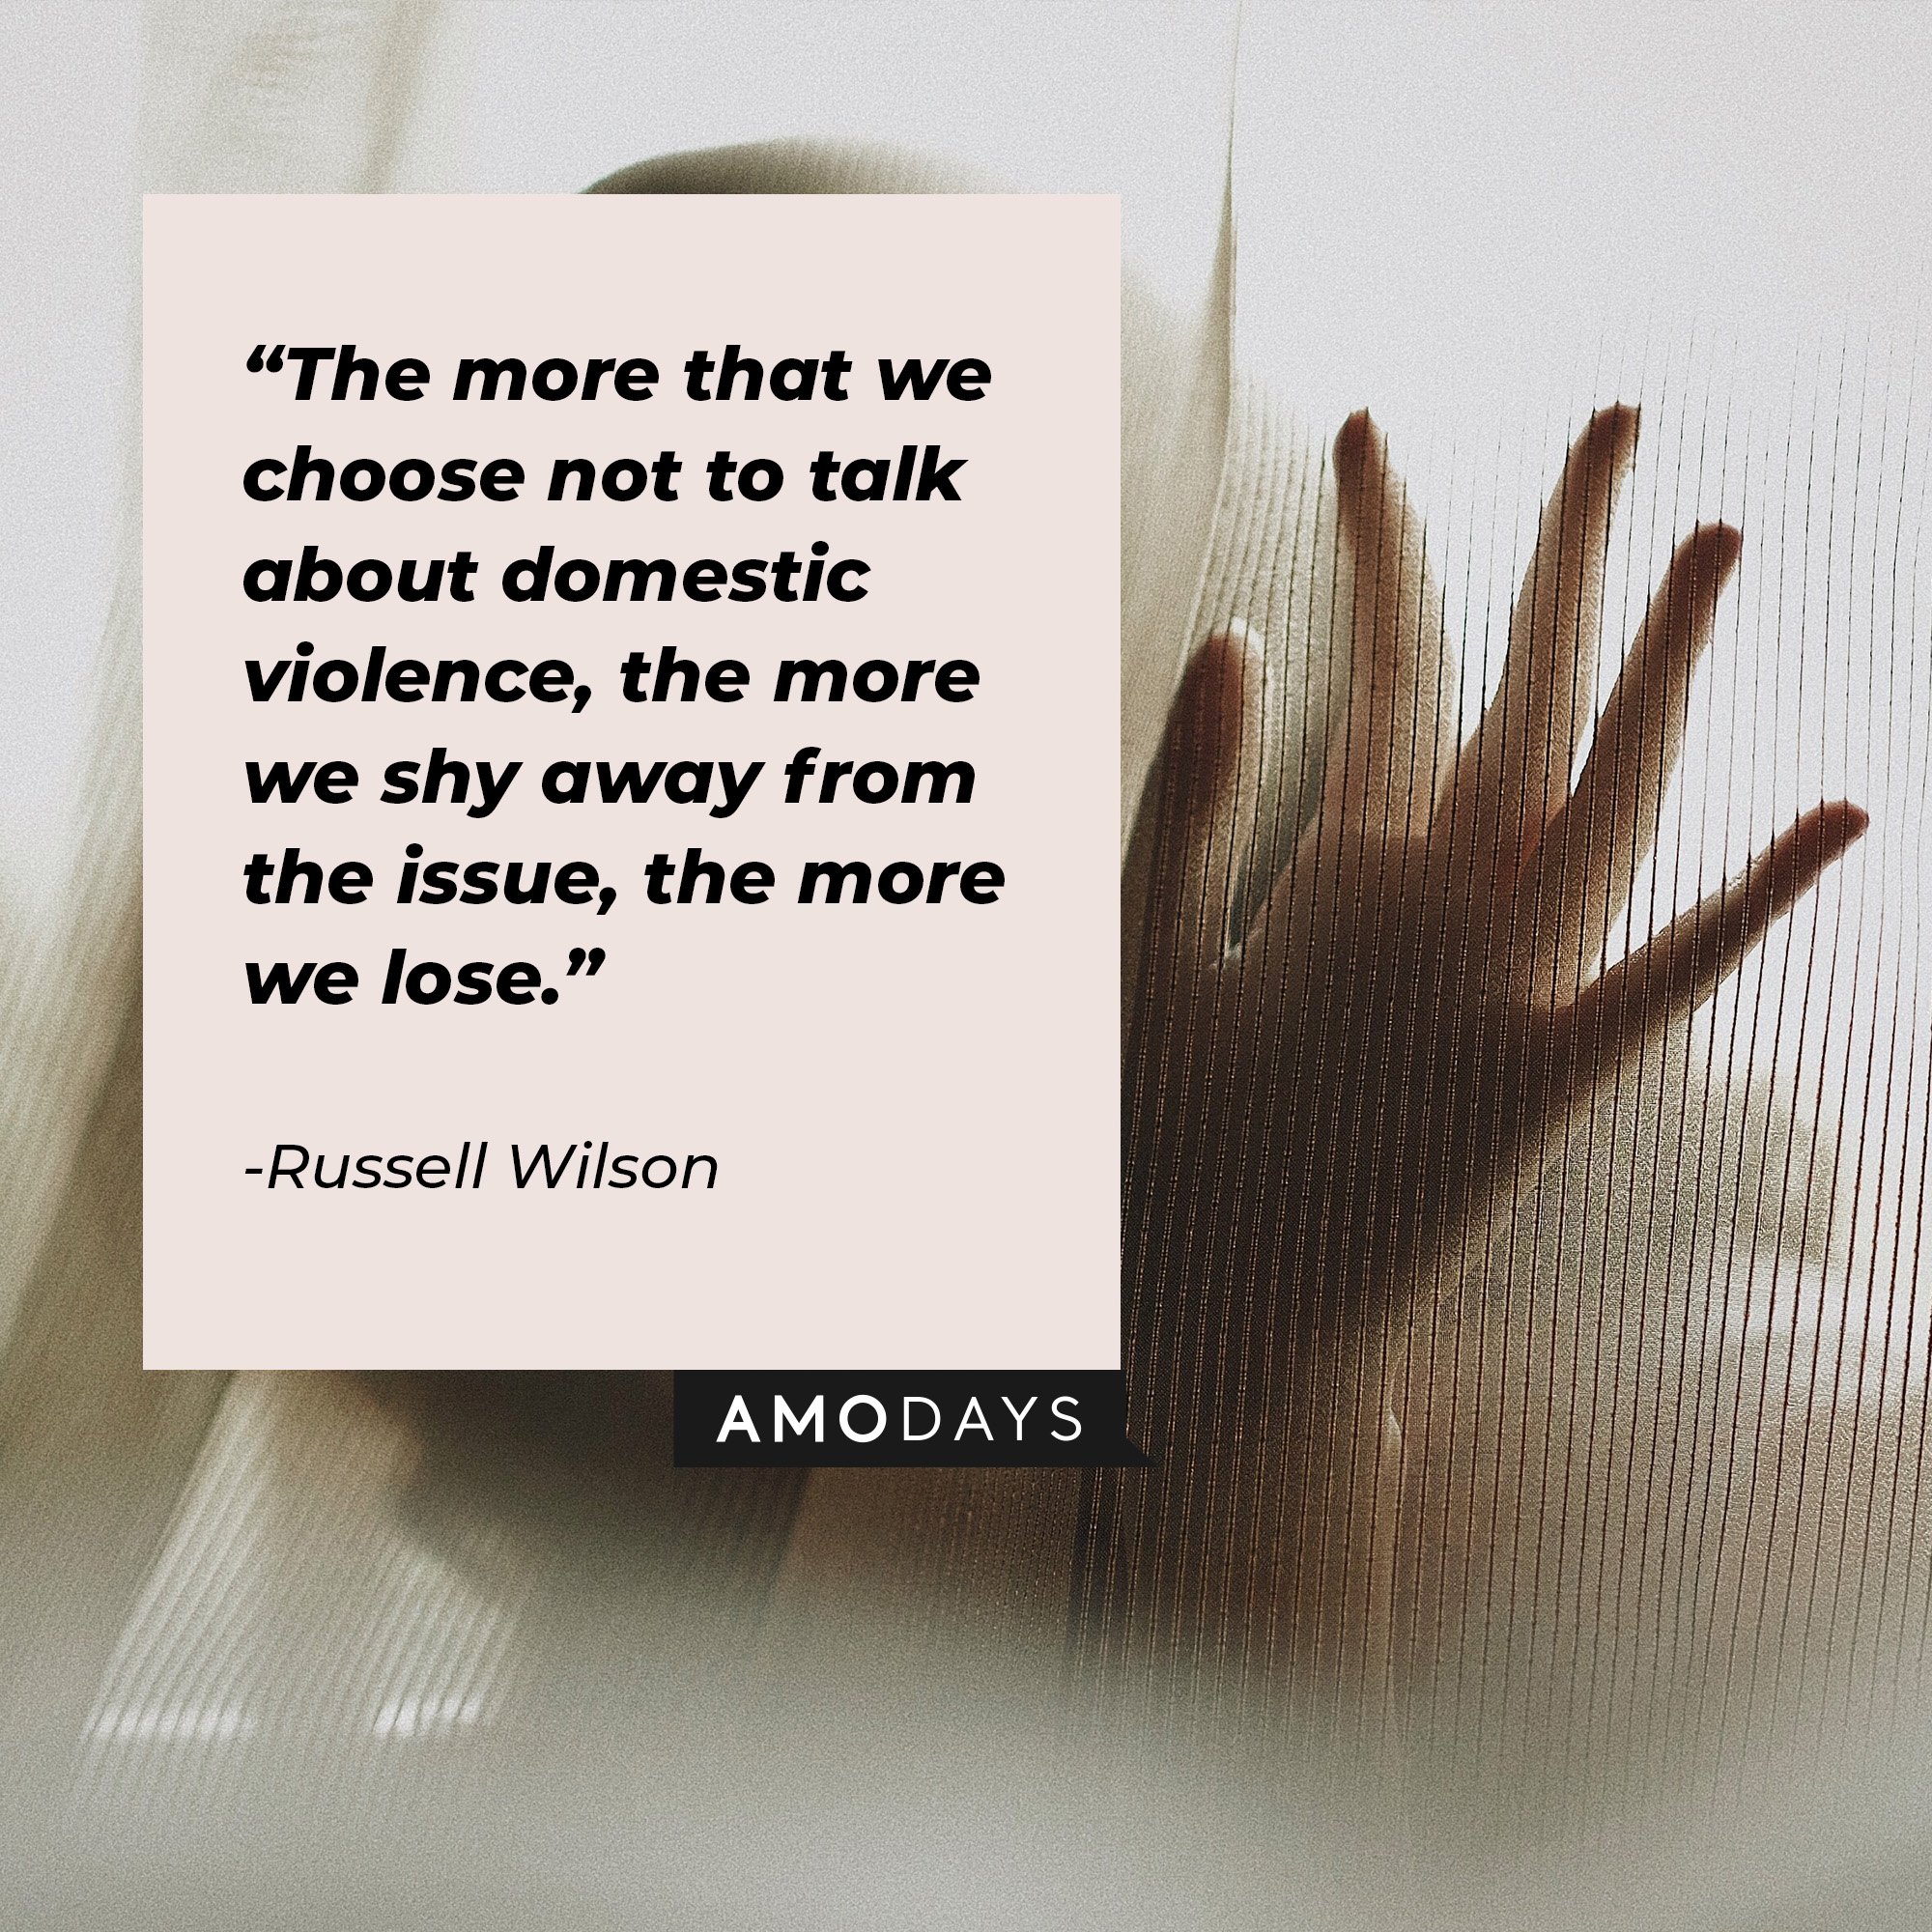  Russell Wilson ‘s quote: “The more that we choose not to talk about domestic violence, the more we shy away from the issue, the more we lose.” | Image: AmoDays  